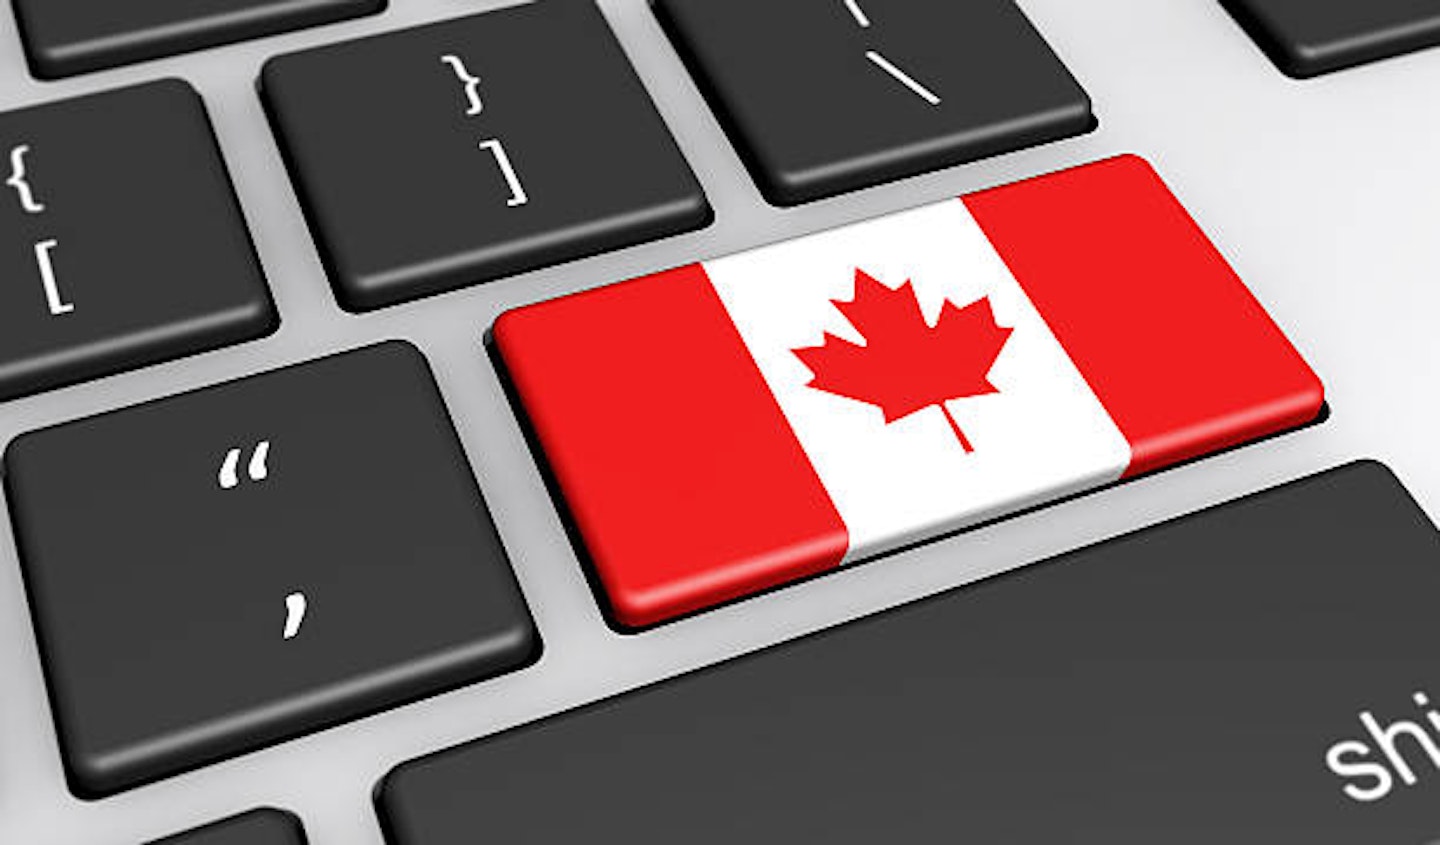 Best VPN for Canada